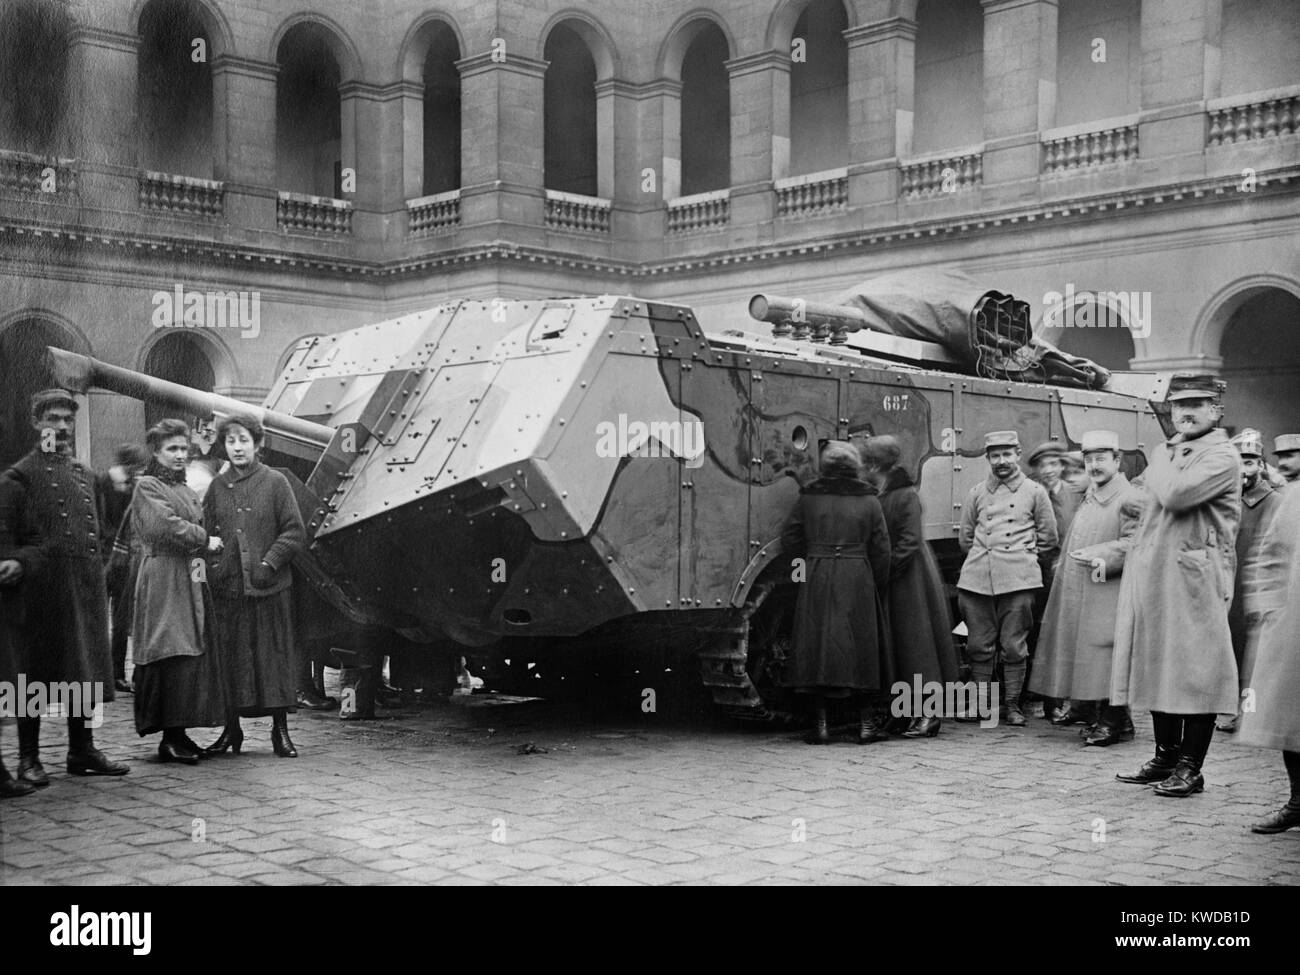 World War 1 Tanks. Camouflaged French Saint-Chamond tank on display. It had a long body with a lot of the vehicle projecting forward of the short caterpillar tracks. Ca. 1917-8 (BSLOC 2013 1 159) Stock Photo